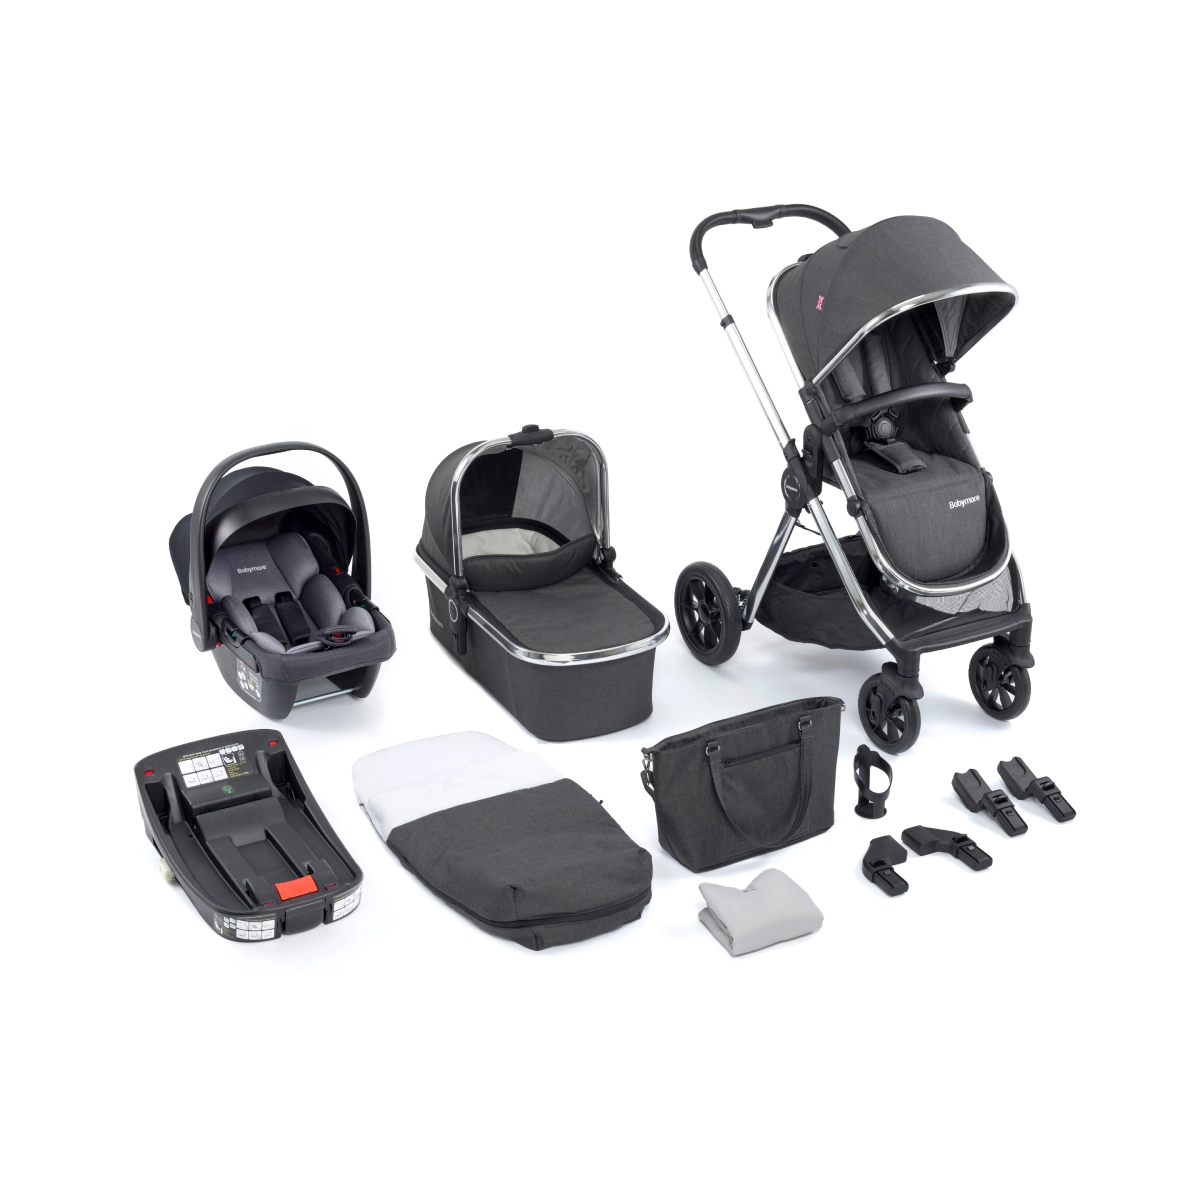 Babymore Memore V2 13 Piece Travel System Bundle with Coco i-Size Car Seat and Isofix Base